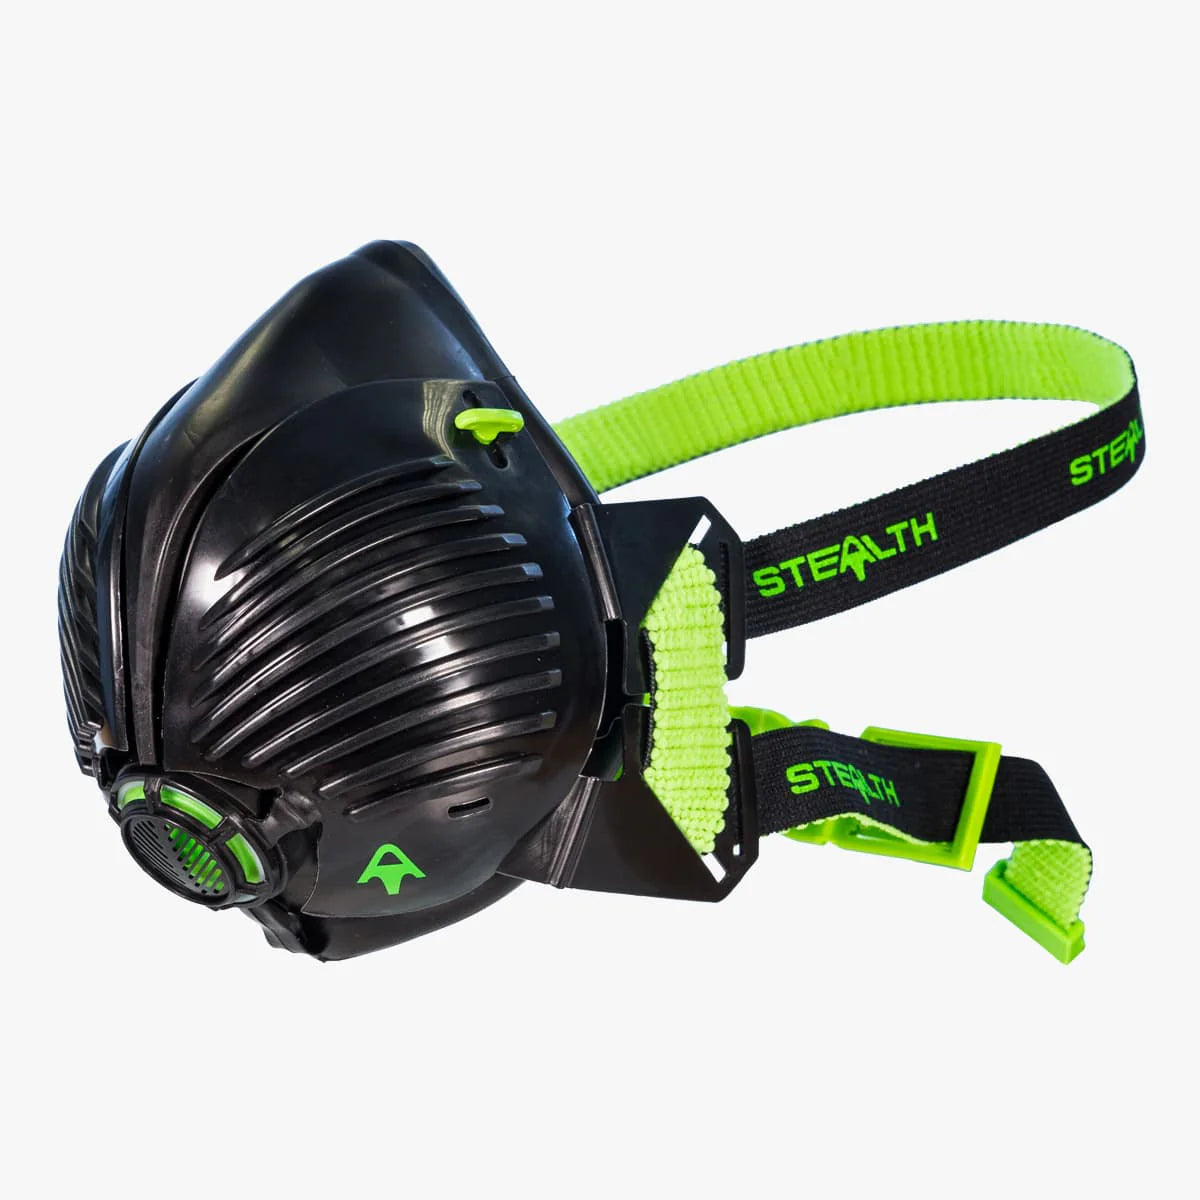 Stealth P3 Dust Respirator Face Mask- 0203